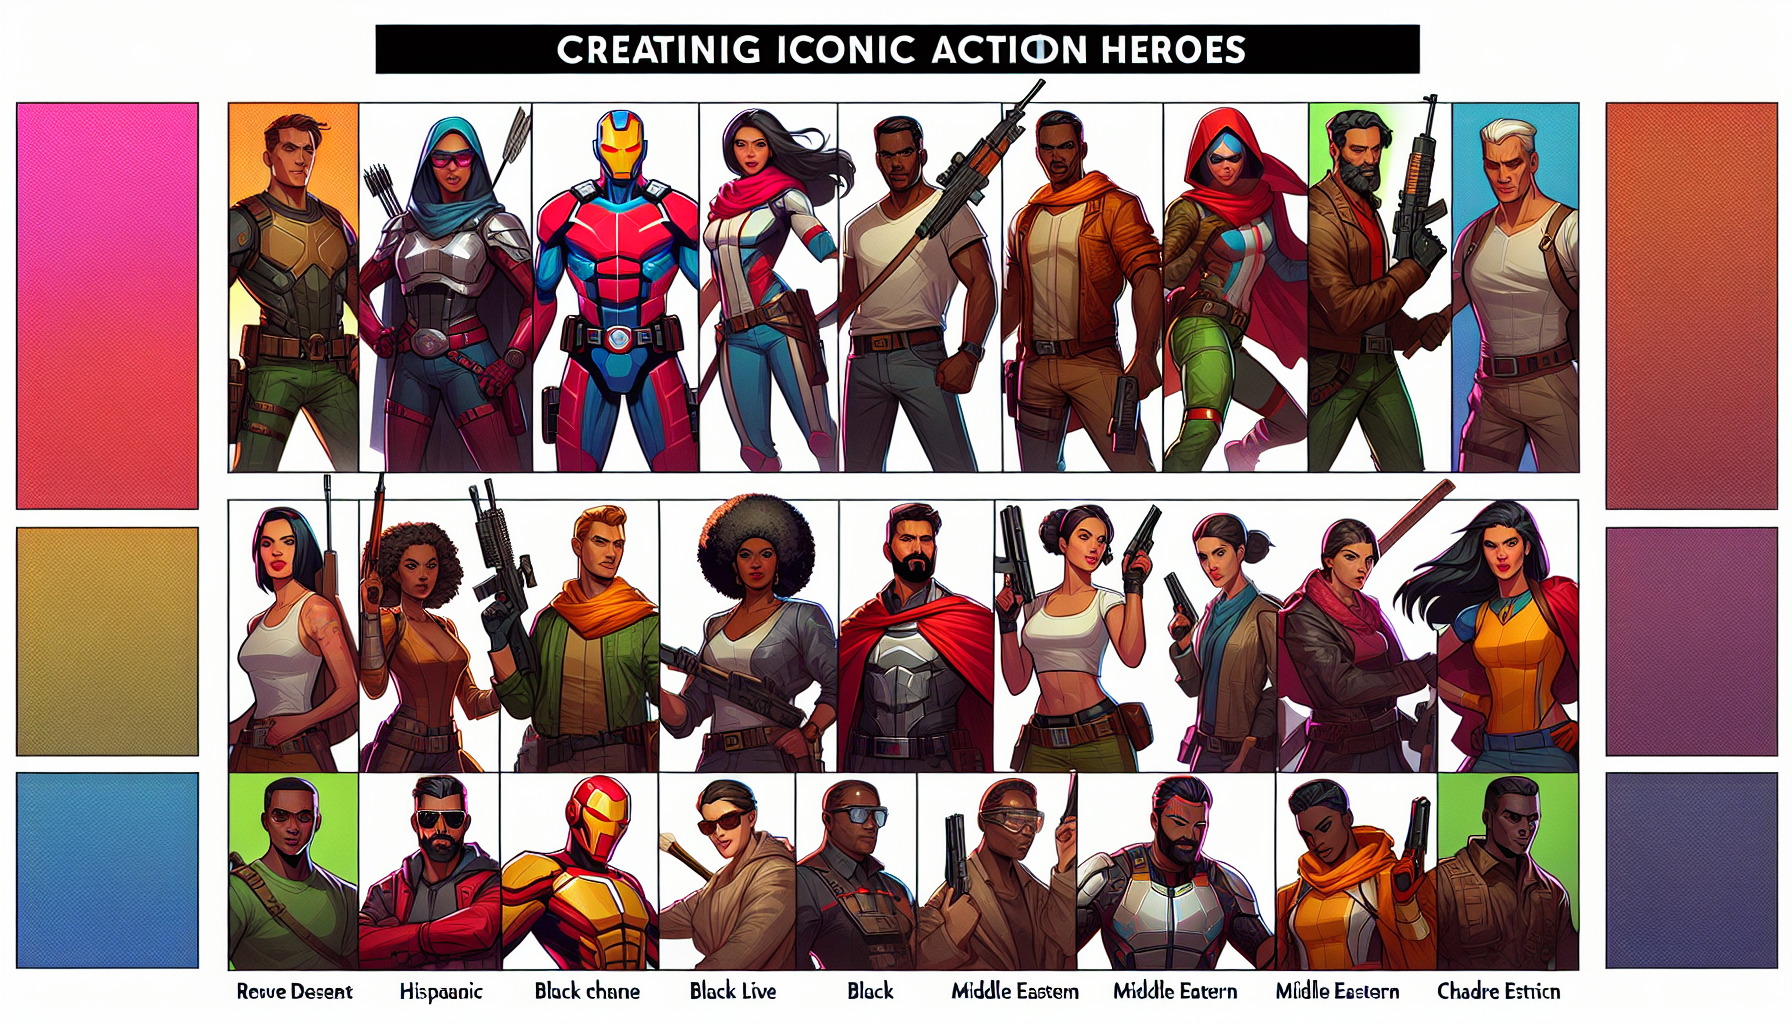 Create a visualization for a guide titled 'Creating Iconic Action Heroes'. It should display a variety of action character designs. Each character should be illustrated in vibrant and modern style. Aim for photorealism, and incorporate diverse descent and gender for each hero: we should see some Hispanic female heroes, Black male heroes, Middle Eastern female heroes, and so on. The overall tone should be engaging and energetic to reflect the action genre. No words should be included in the image.